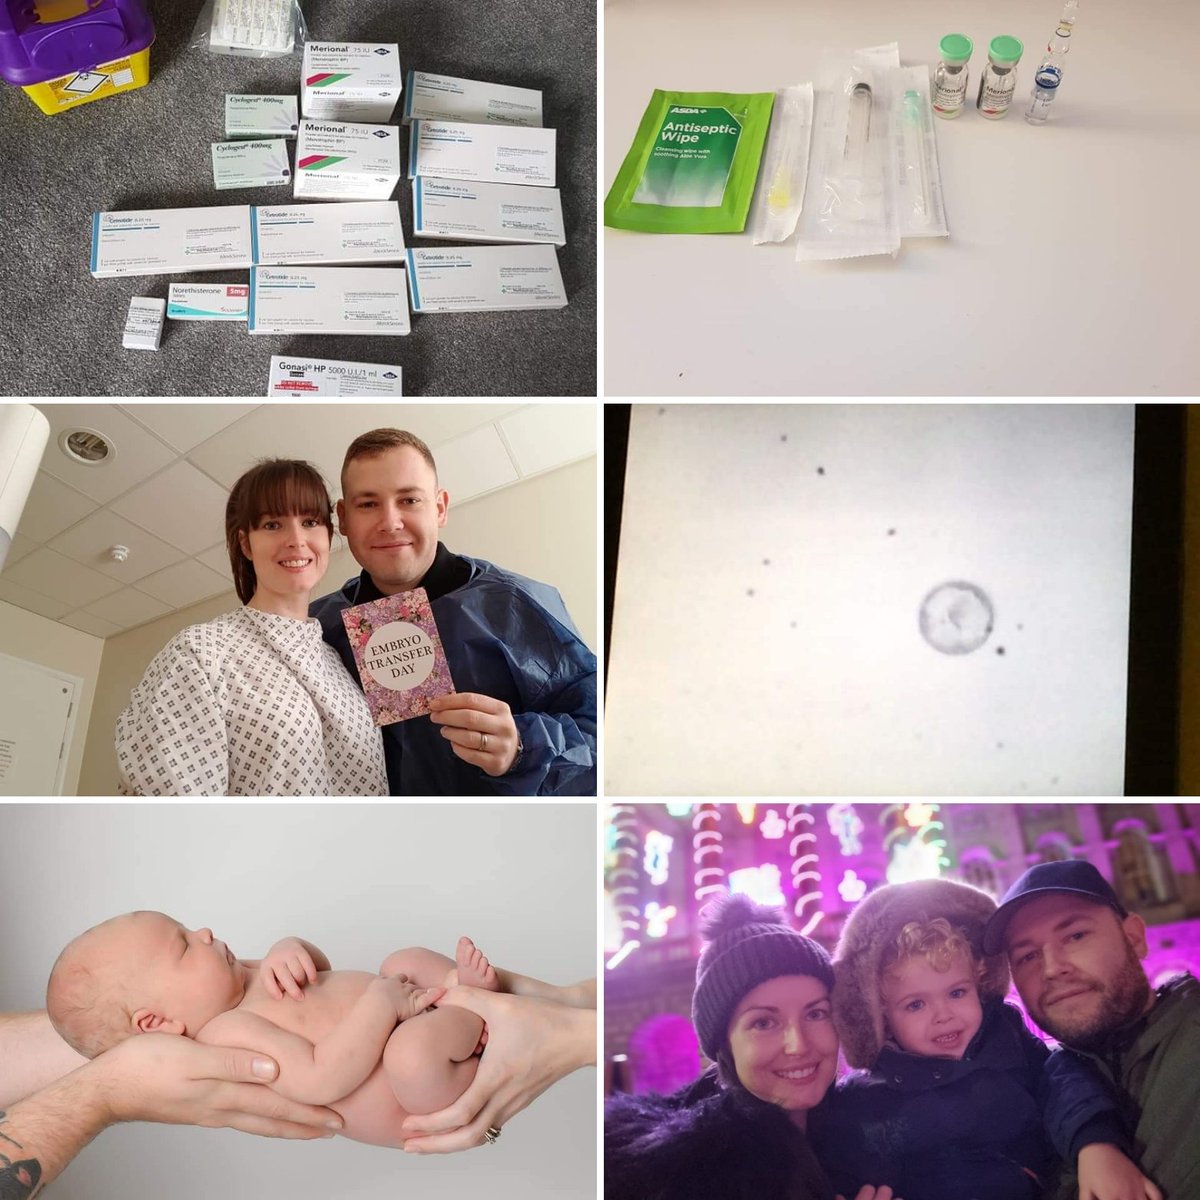 I've travelled wide and far but this was the best journey of my life and keeps getting better with our little miracle @lea_dempsey @HewittFertility @LWHCharity #dadlife #nhs #FertilityAwarenessWeek #IVF